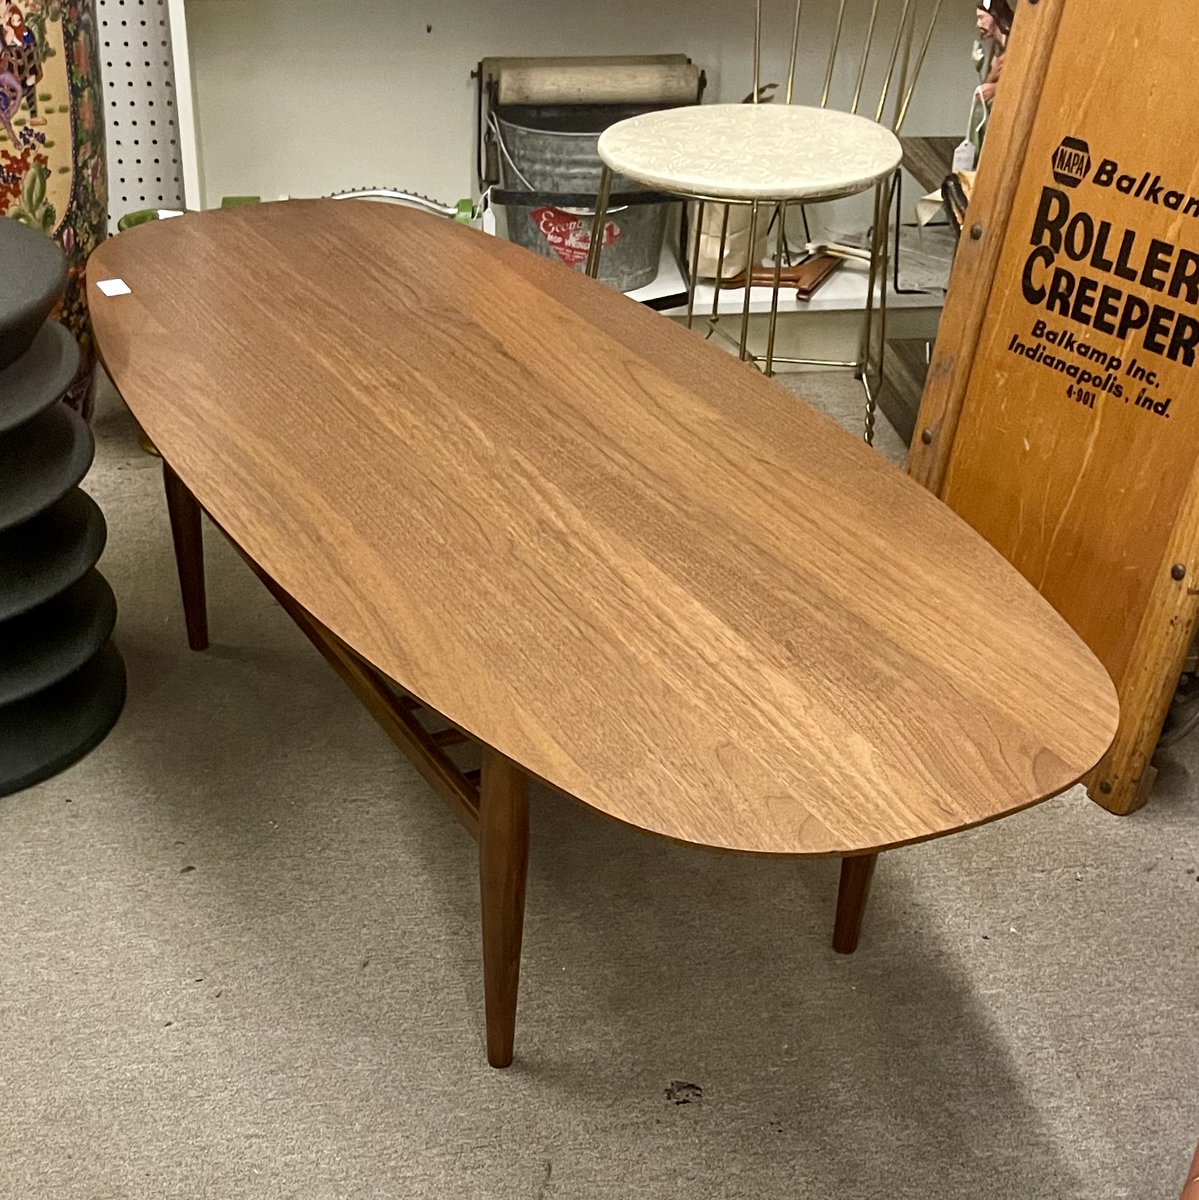 Really cool Mid Centrury Modern Table with a magazine shelf in booth 171!
Please call for purchase & availability
.
.
.
#AntiqueTrove #ScottsdaleAntiqueTrove #retro #vintage #antique #MidCenturyModern #AntiqueStore #MCM #VintageFurniture